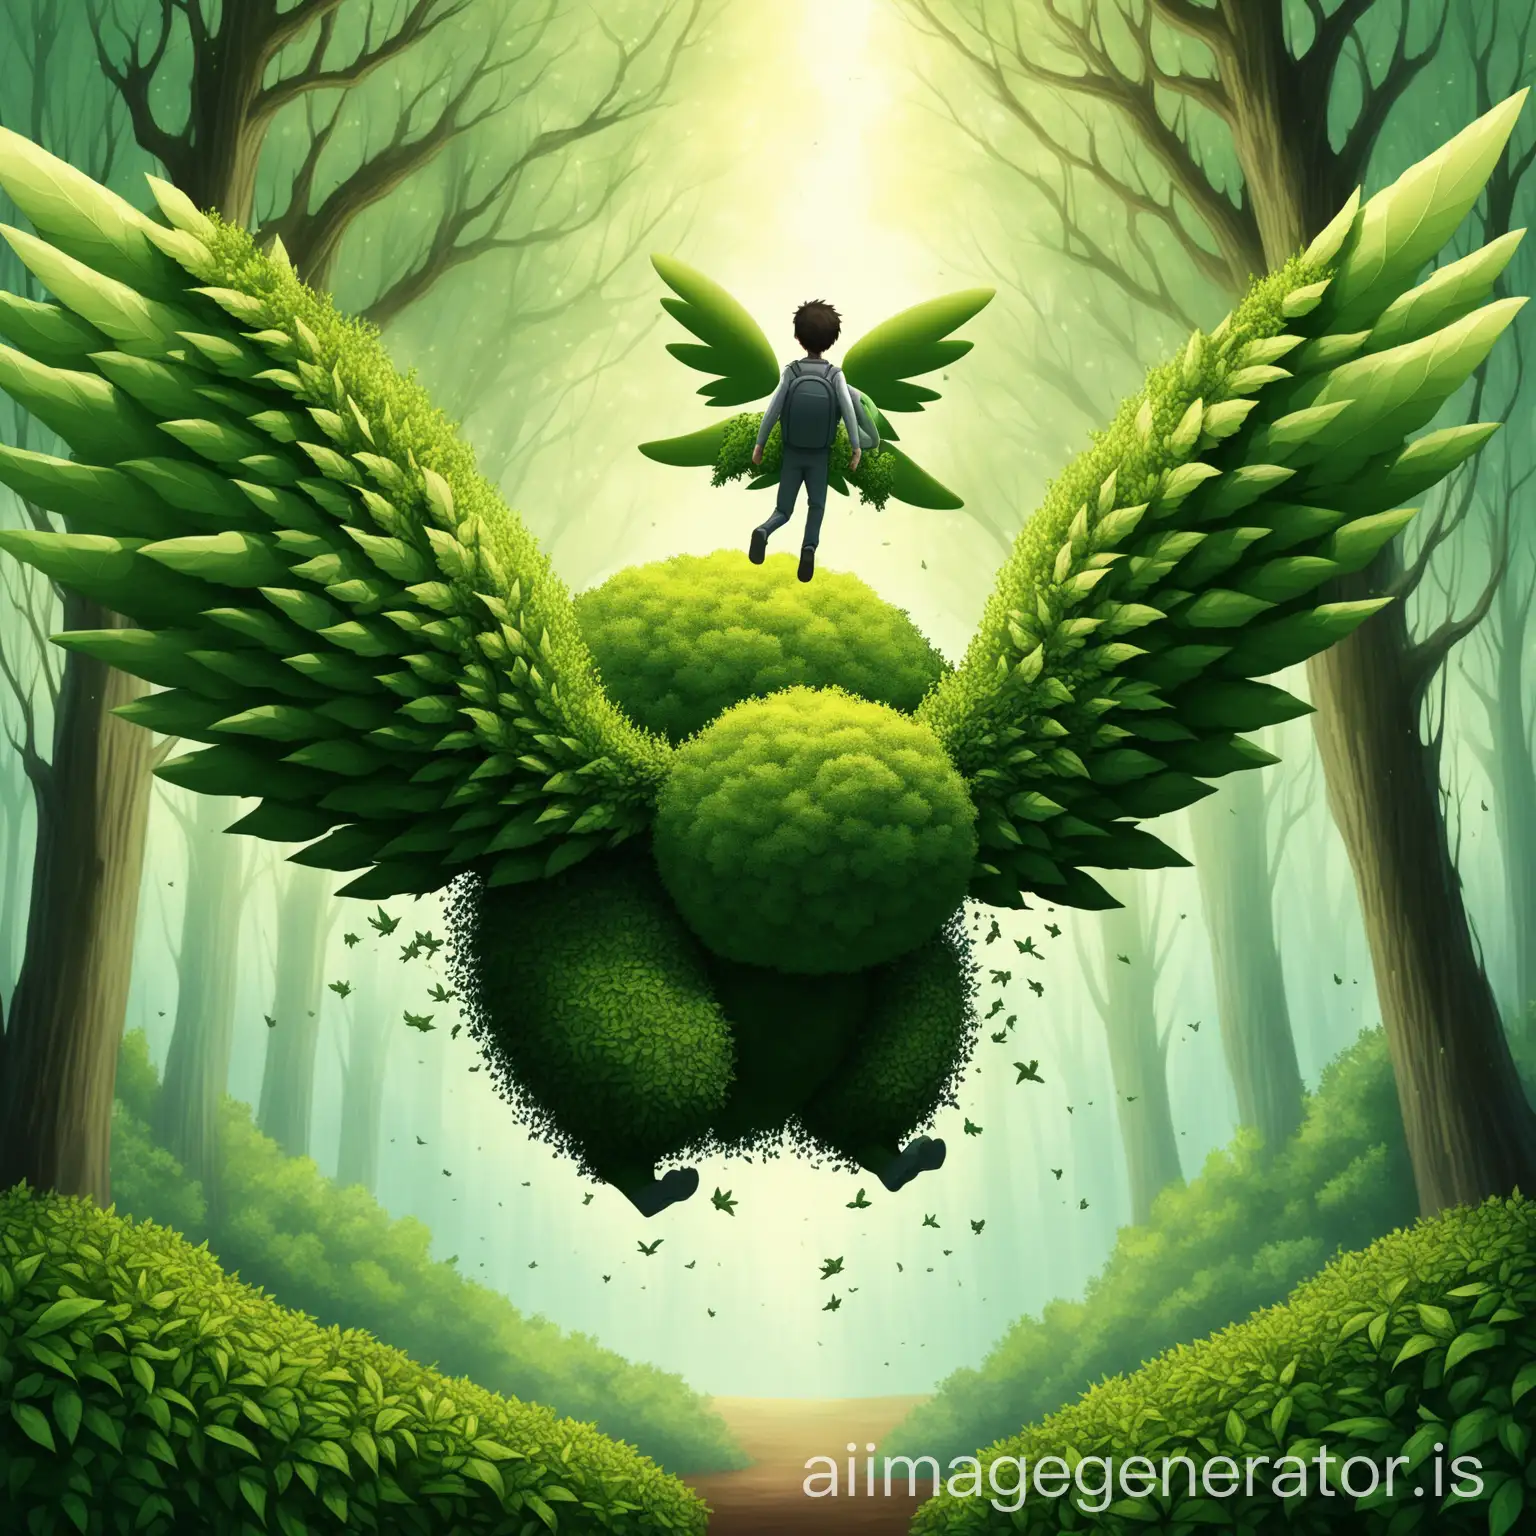 Mystical-Forest-Encounter-Giant-Flying-Shrubbery-with-Human-Passenger